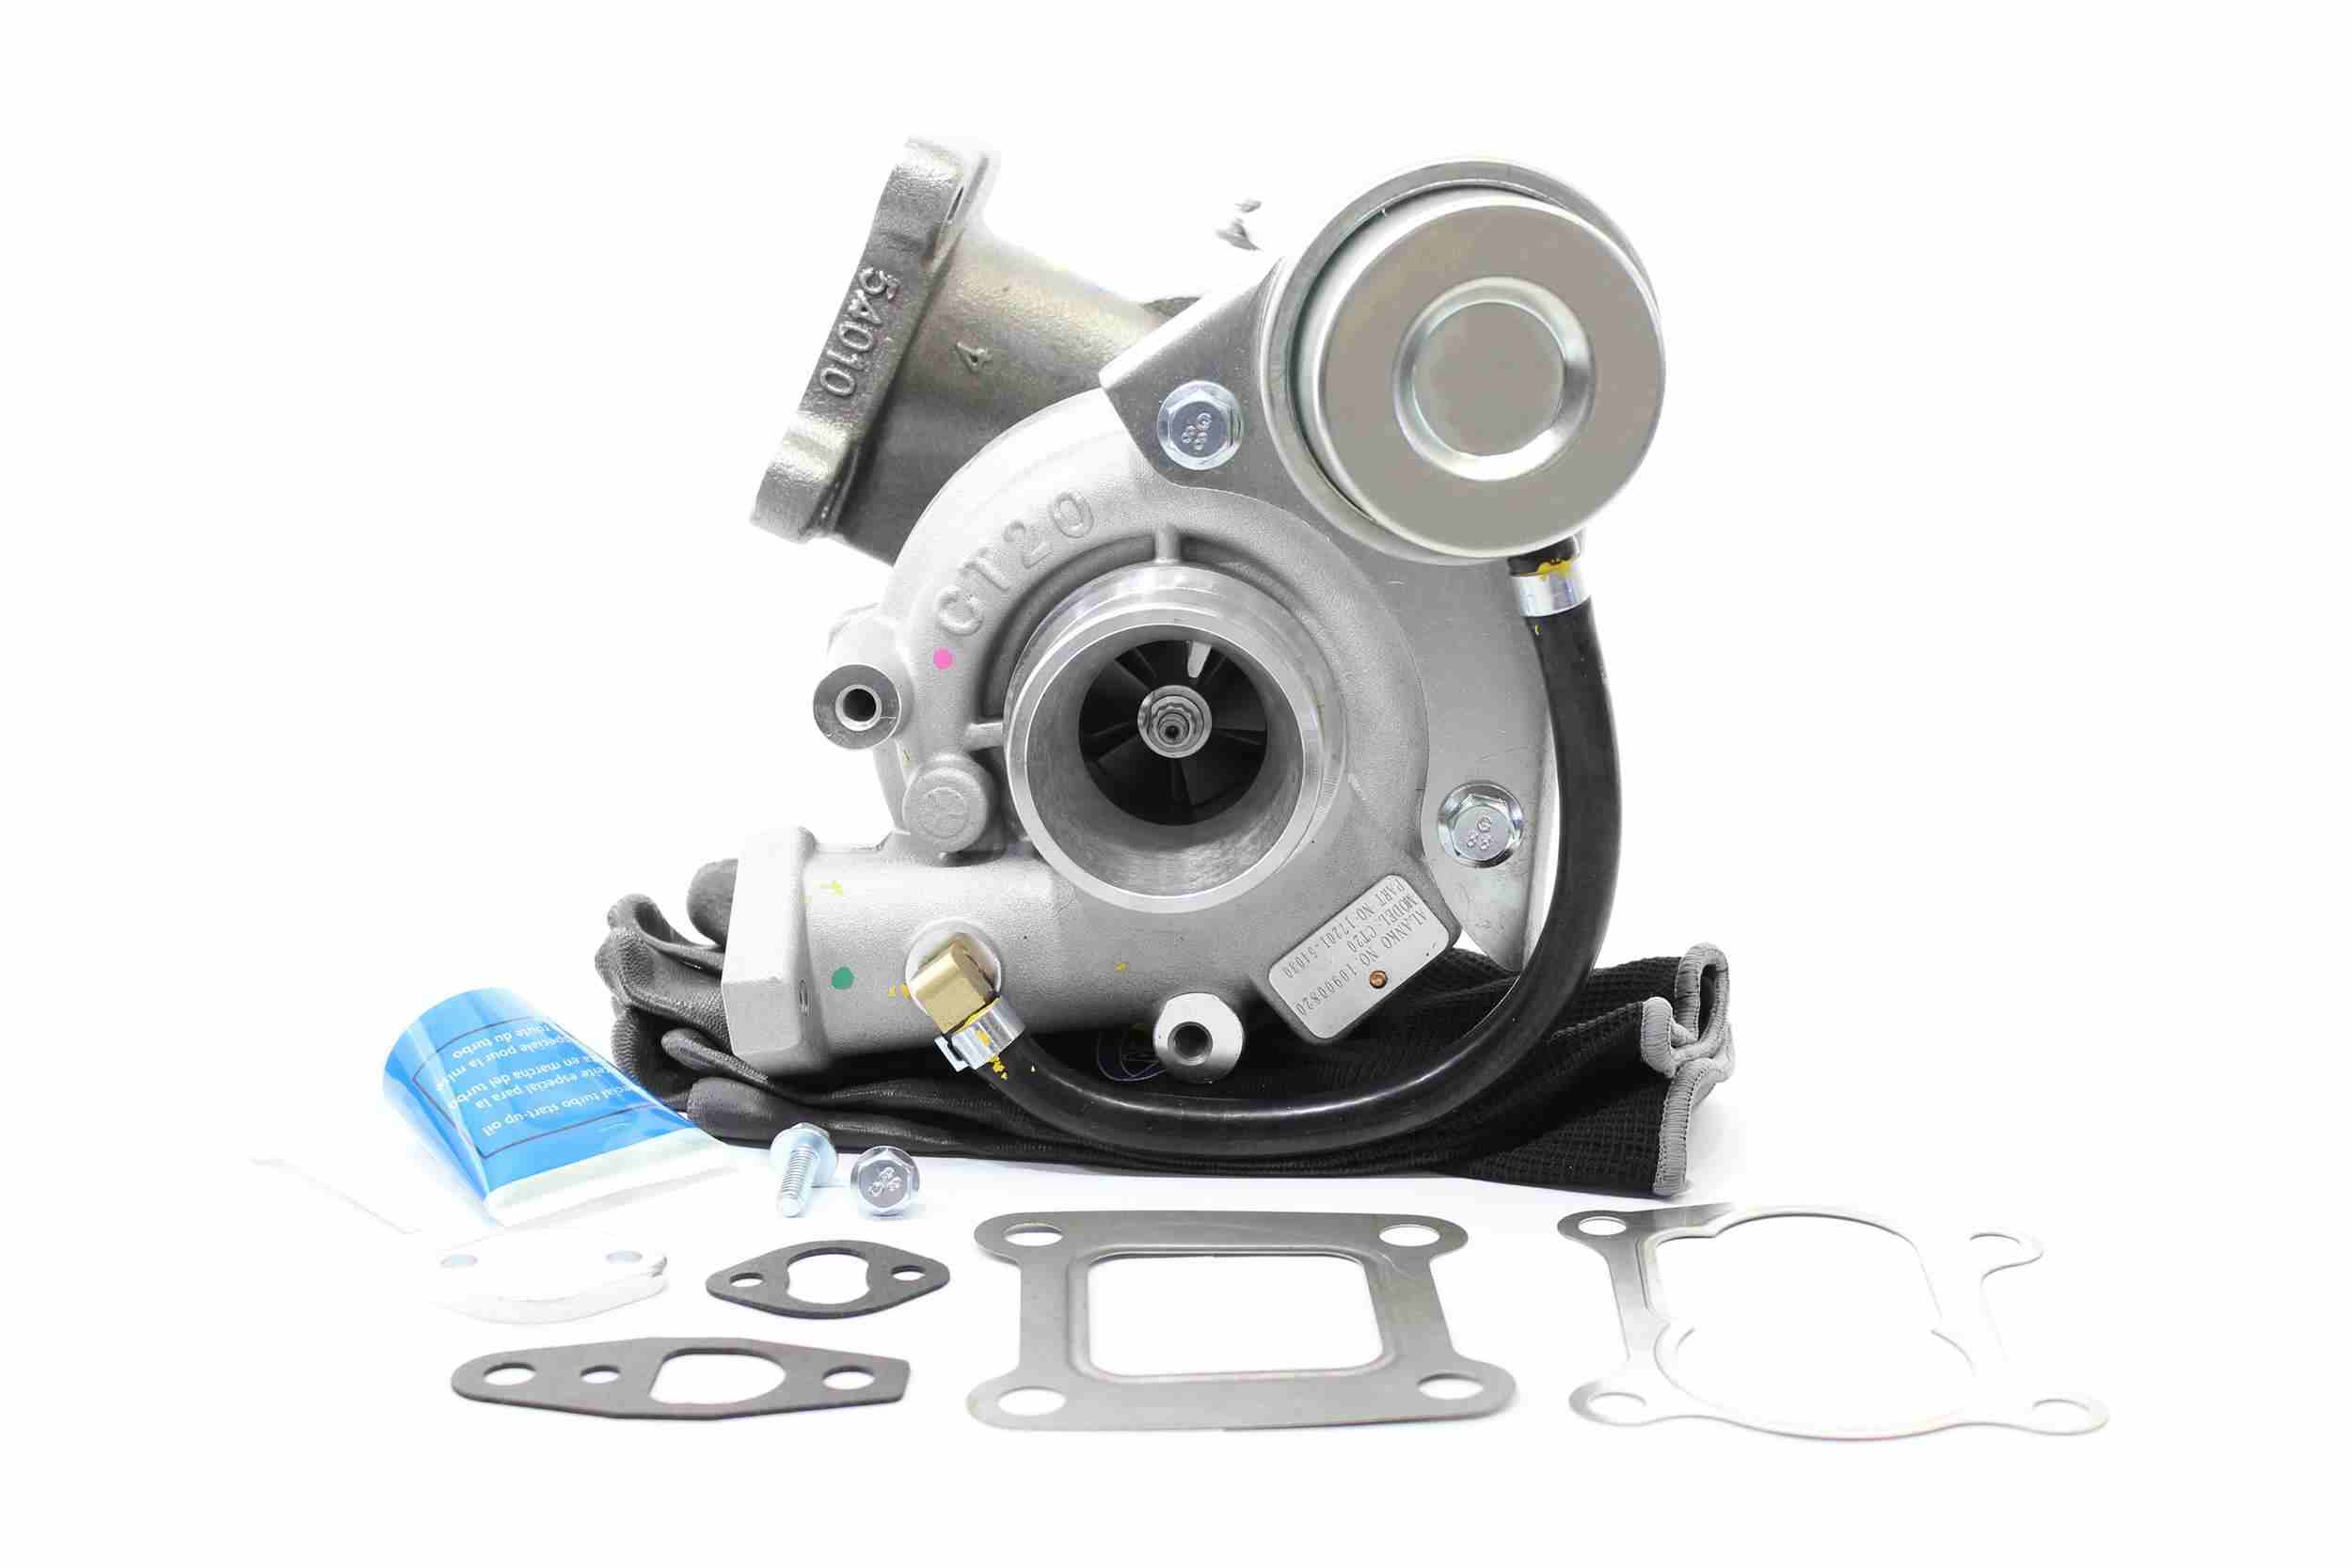 ALANKO 10900820 Turbocharger Exhaust Turbocharger, Incl. Gasket Set, with attachment material